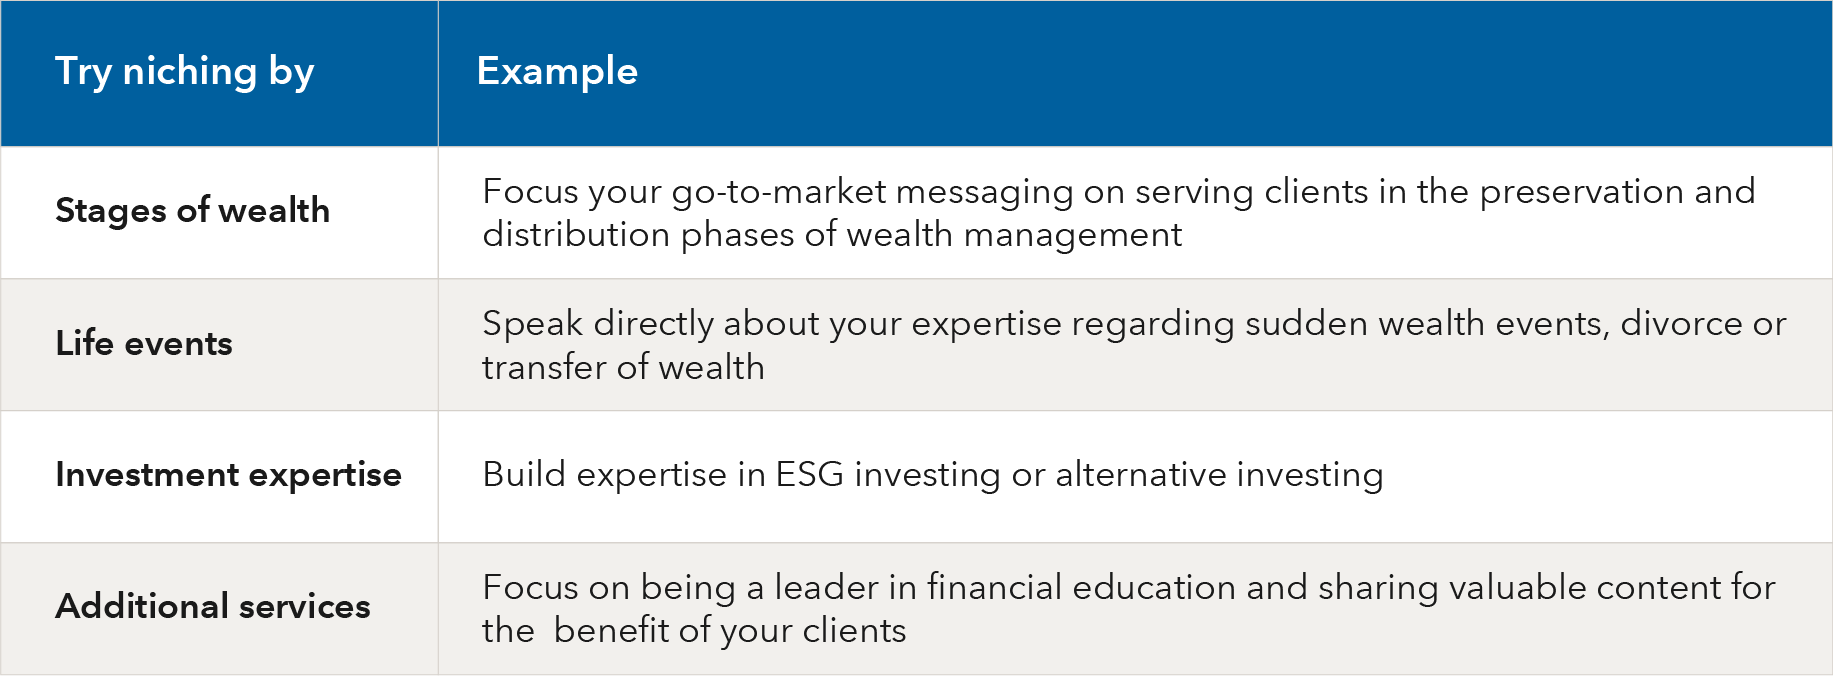 A table showing four approaches to niching, with an example for each. Stages of wealth: Focus your go-to-market messaging on serving clients in the preservation and distribution phases of wealth management. Life events: Speak directly about your expertise regarding sudden wealth events, divorce or transfer of wealth. Investment expertise: Build expertise in ESG investing or alternative investing. Additional services: Focus on being a leader in financial education and sharing valuable content for the benefit of your clients.